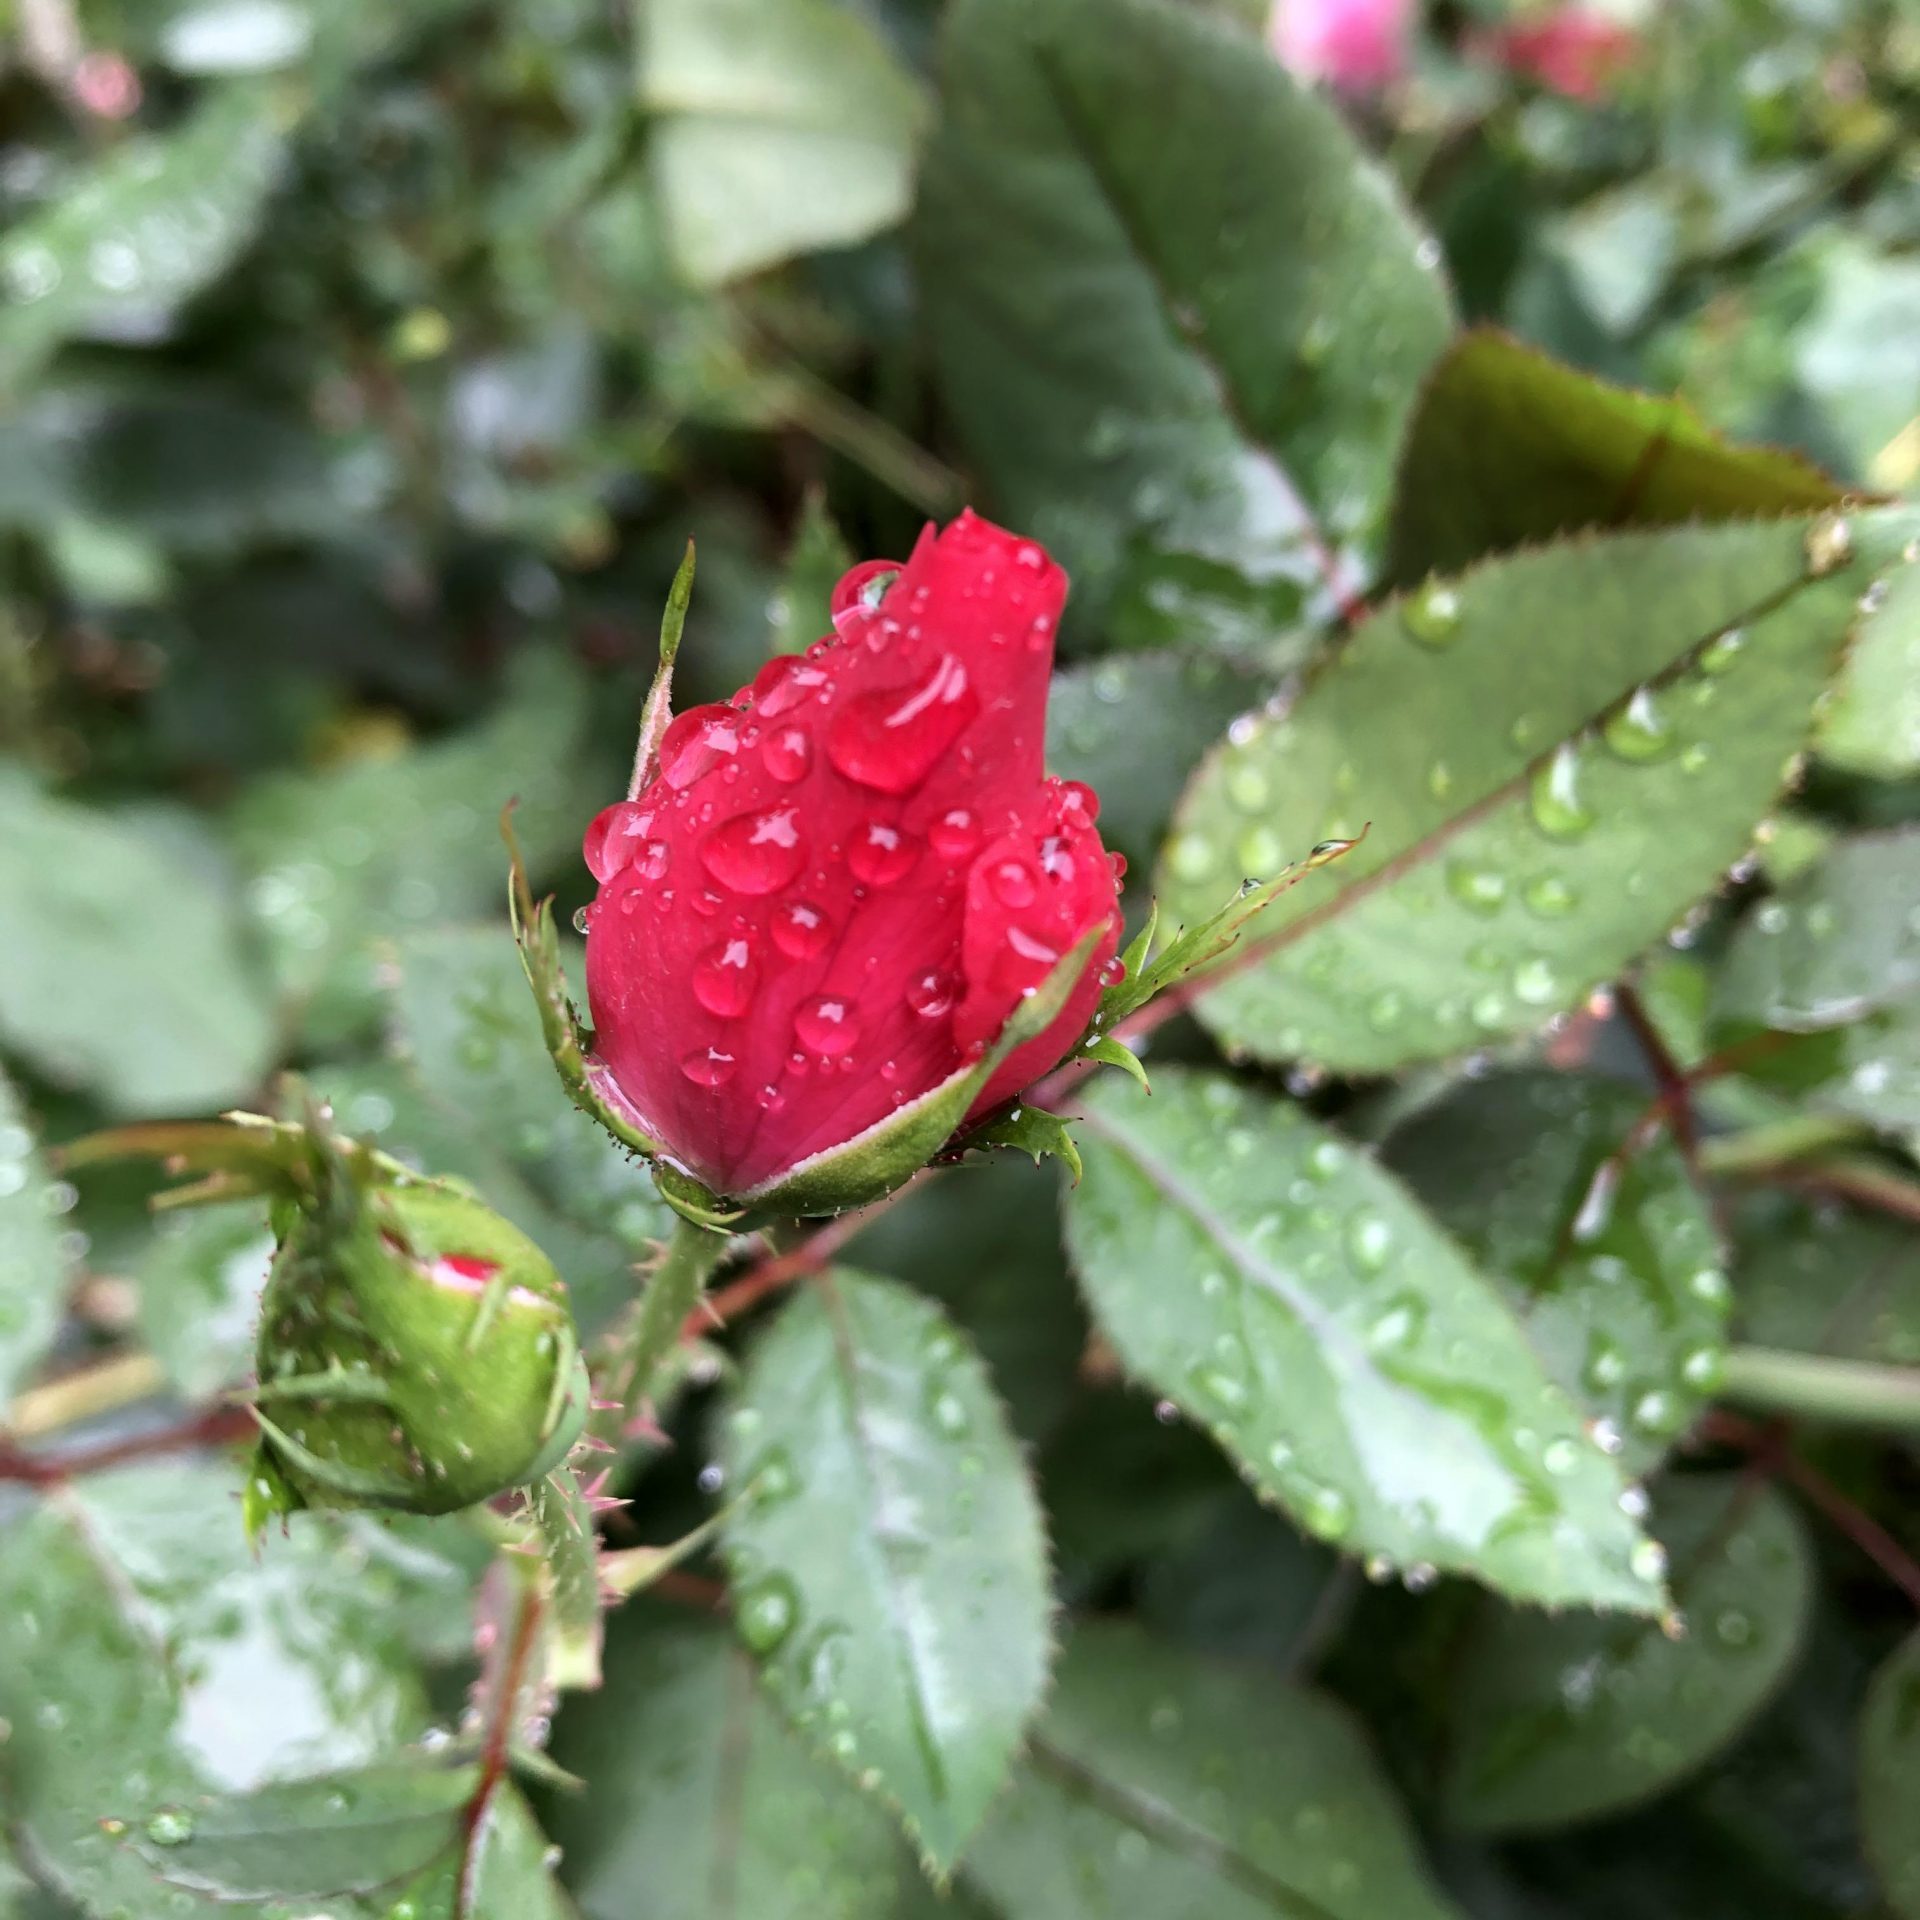 rose with raindrops